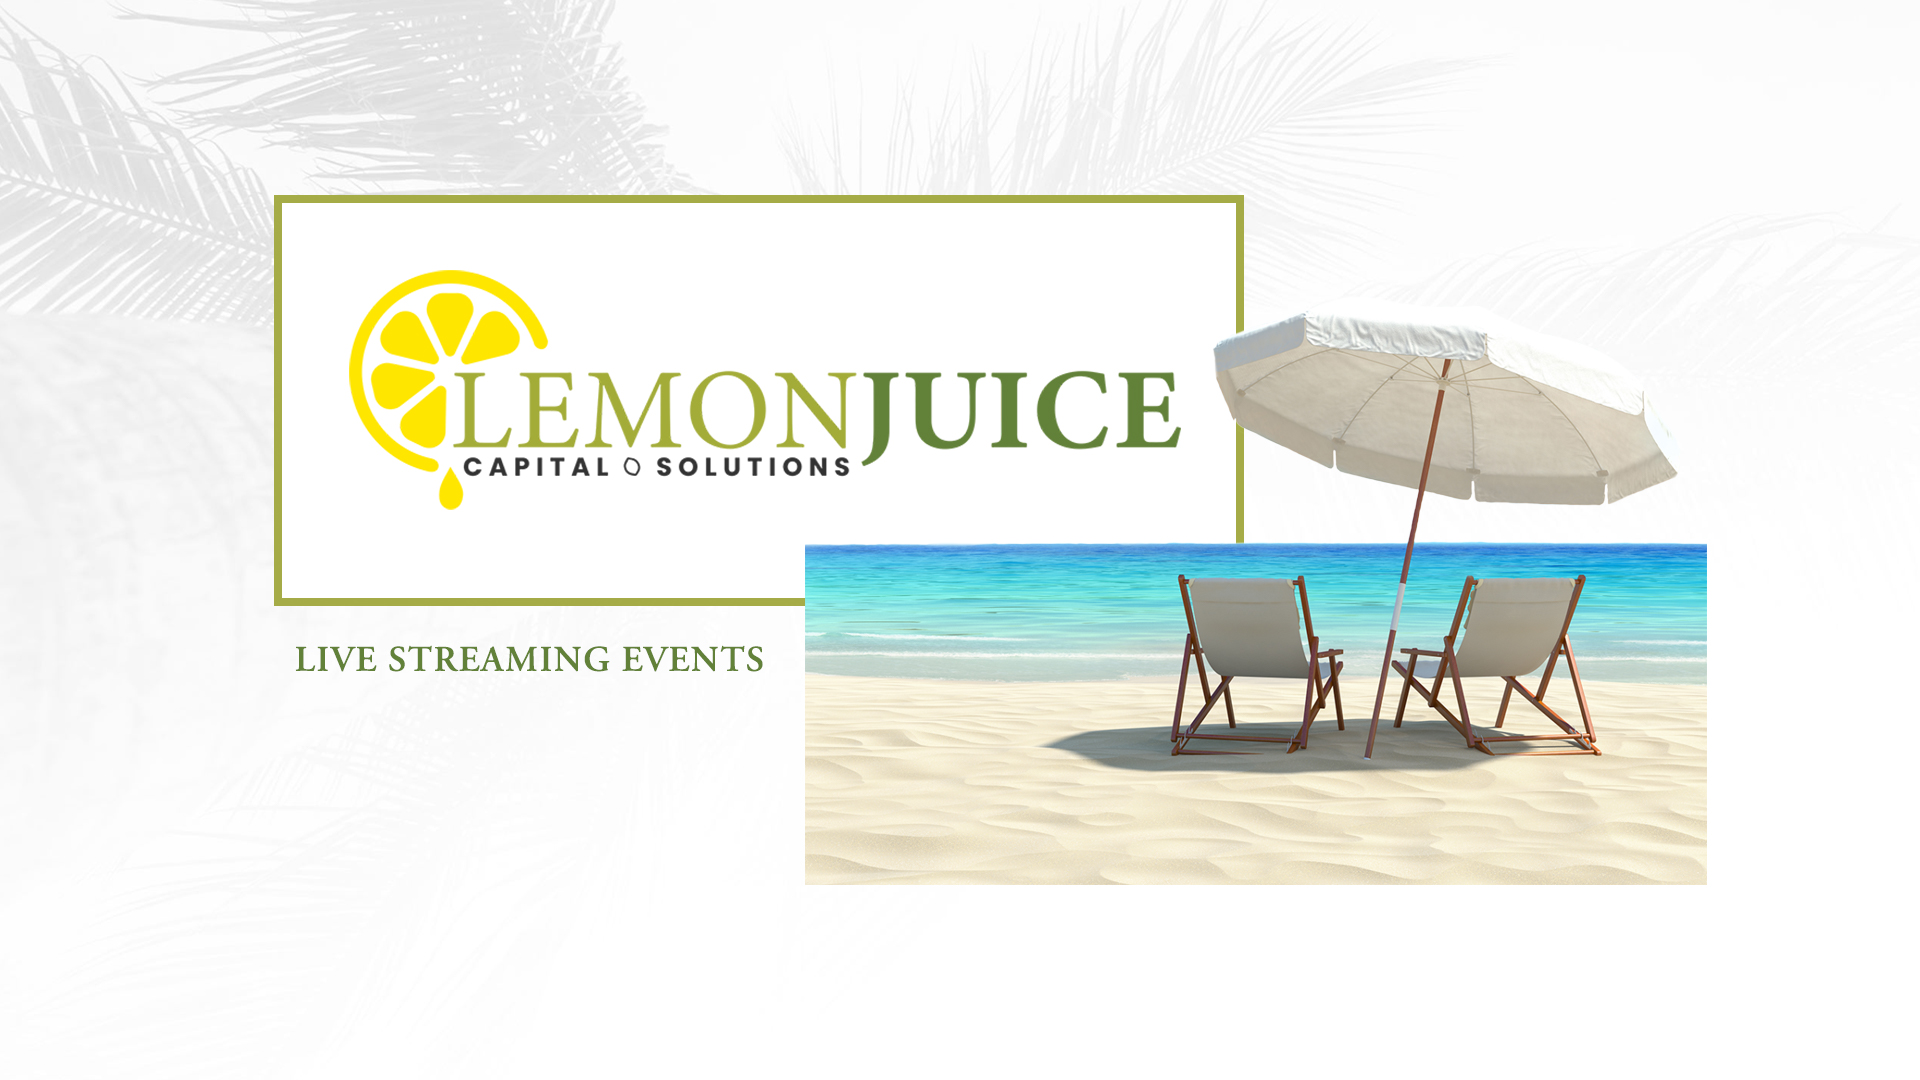 Lemonjuice Capital and Solutions